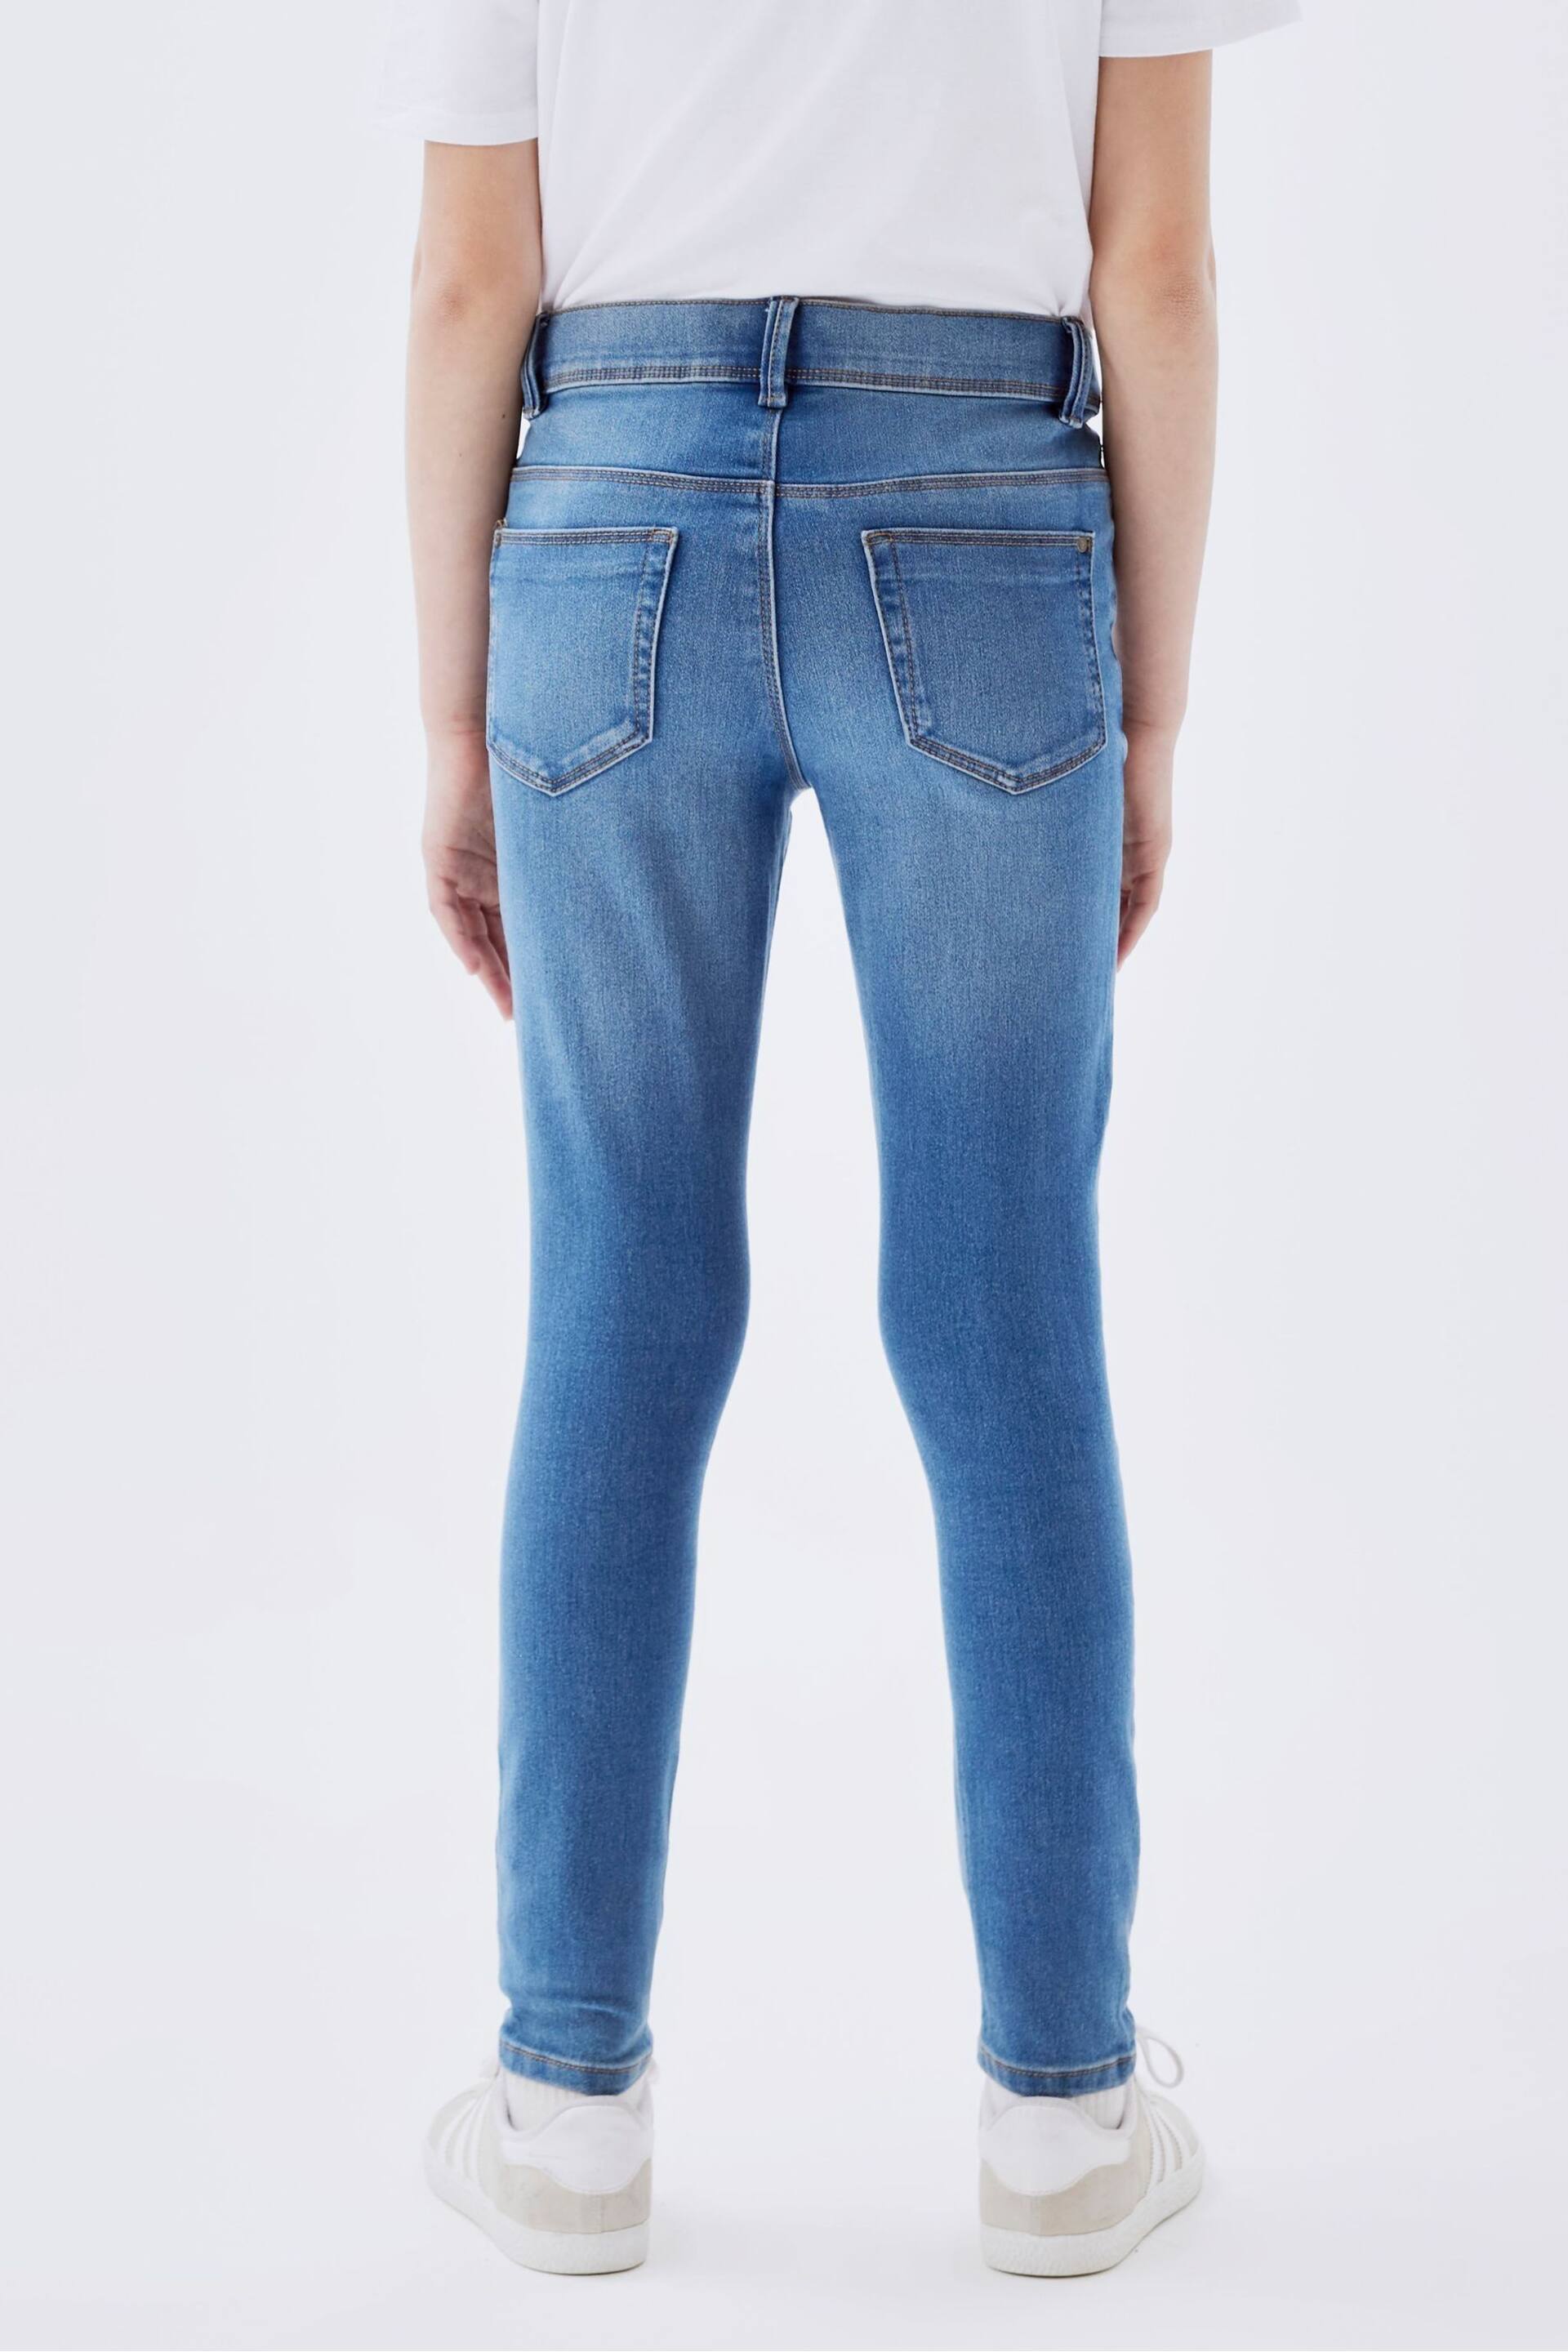 Name It Blue Skinny Jeans - Image 2 of 5